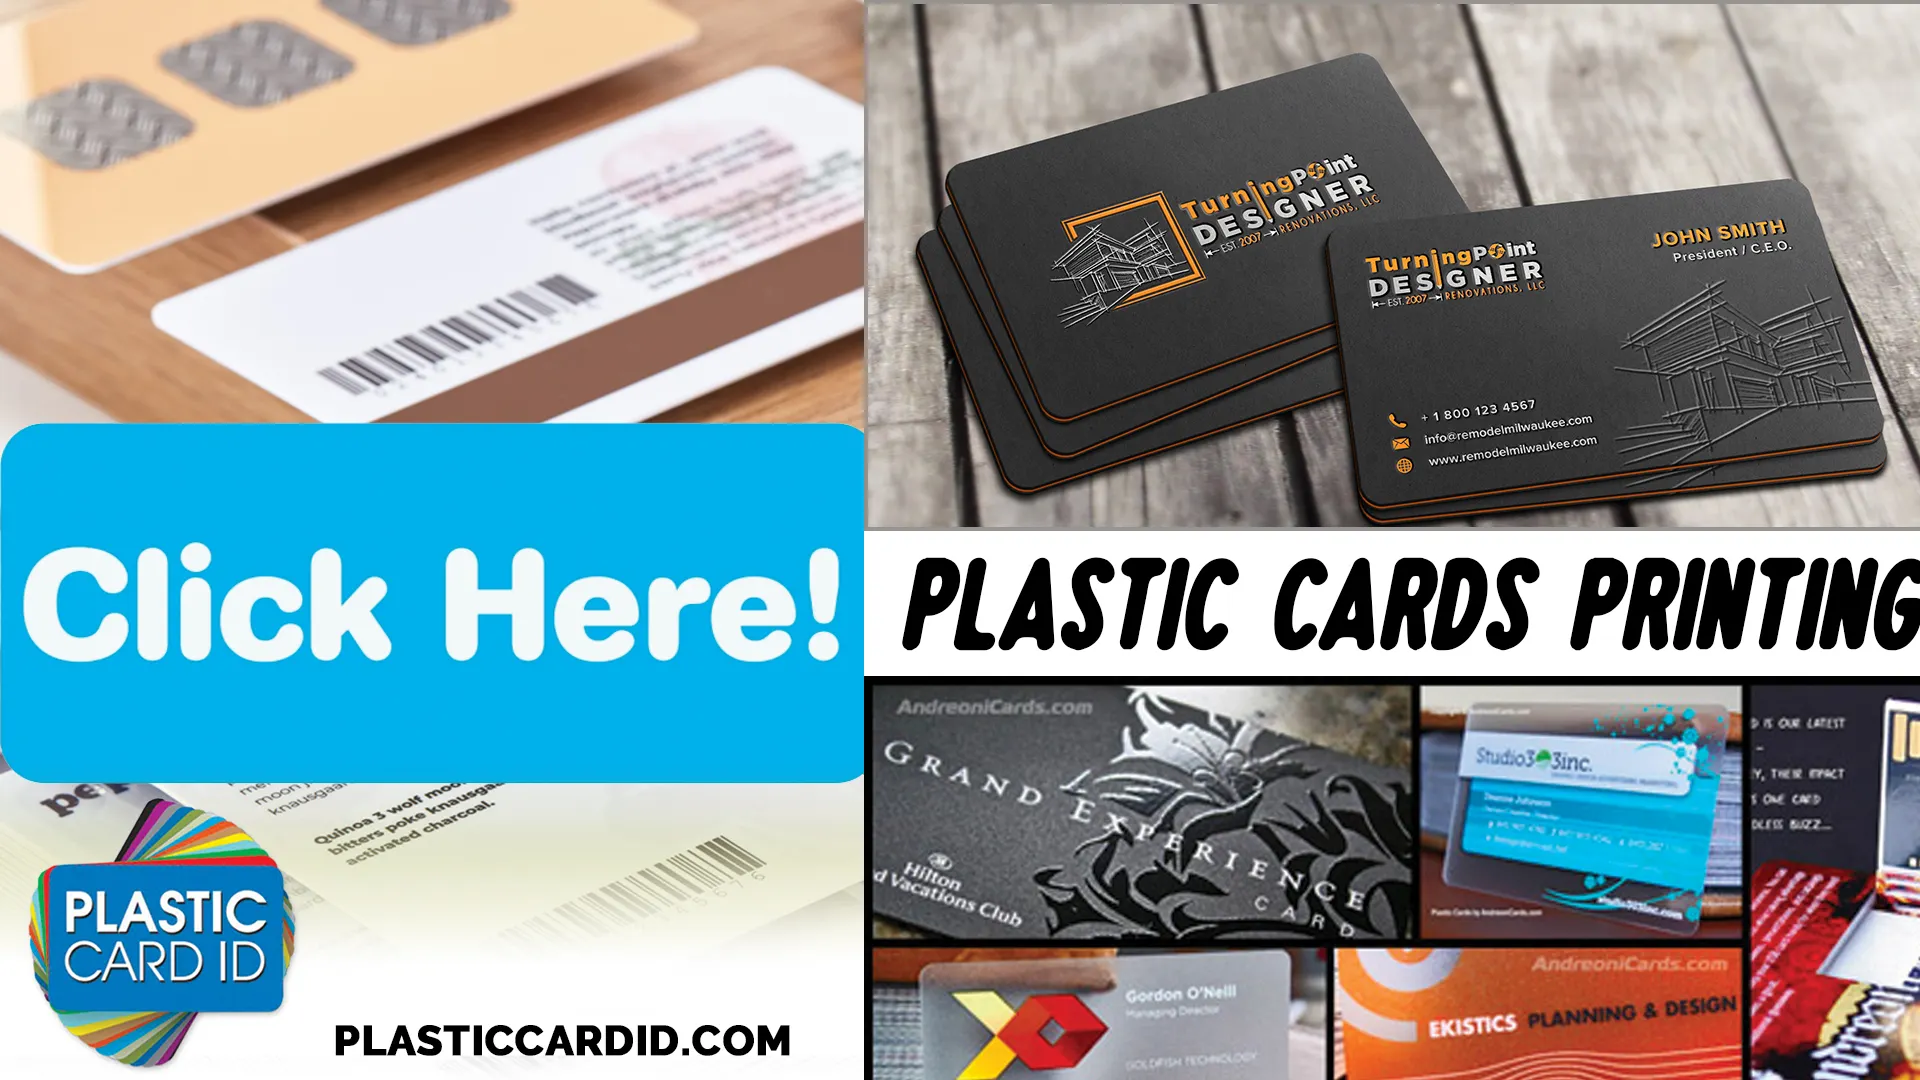 Crafted for Every Industry: Plastic Card ID
's Custom Card Solutions